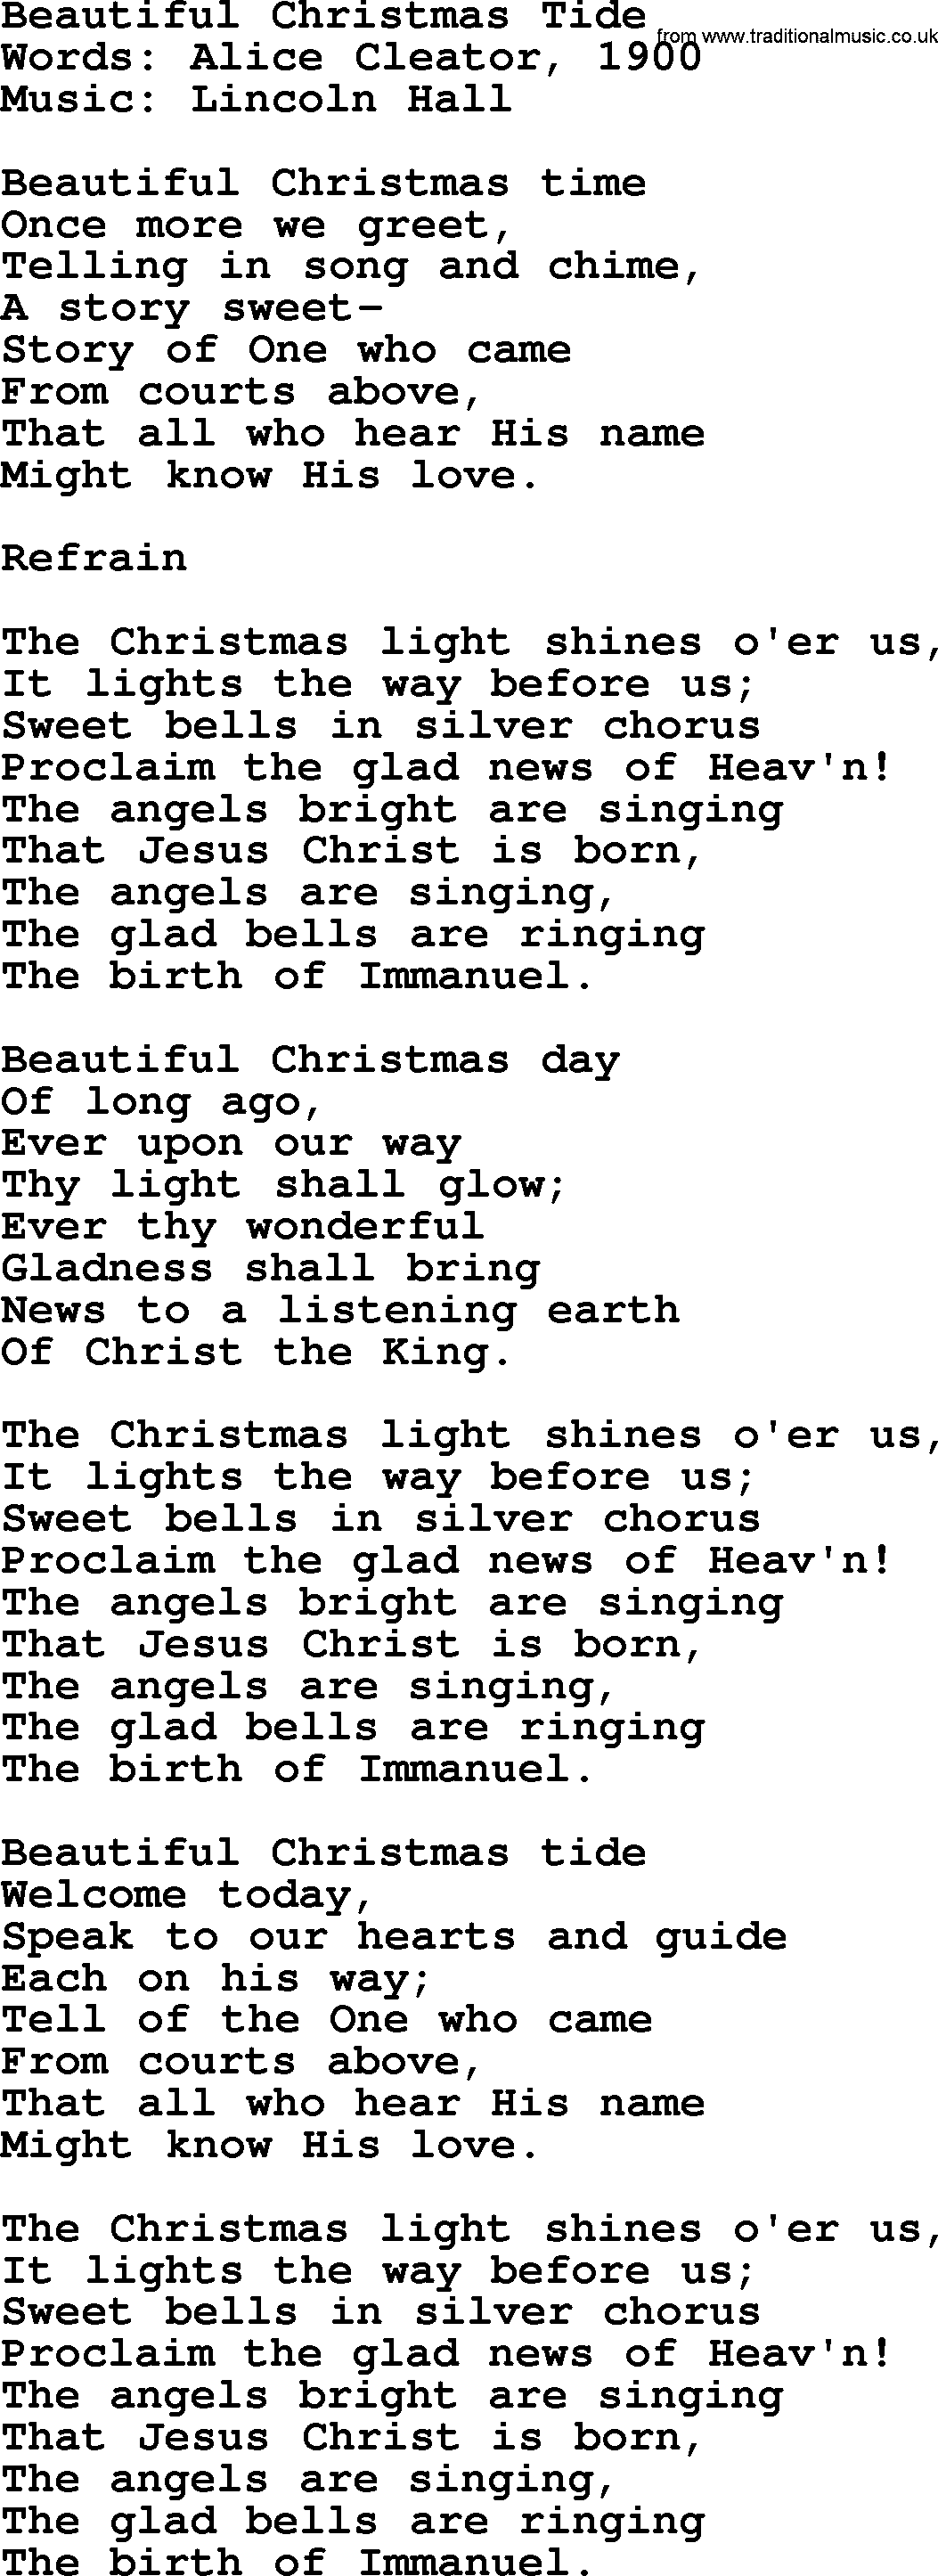 280 Christmas Hymns and songs with PowerPoints and PDF, title: Beautiful Christmas Tide, lyrics, PPT and PDF